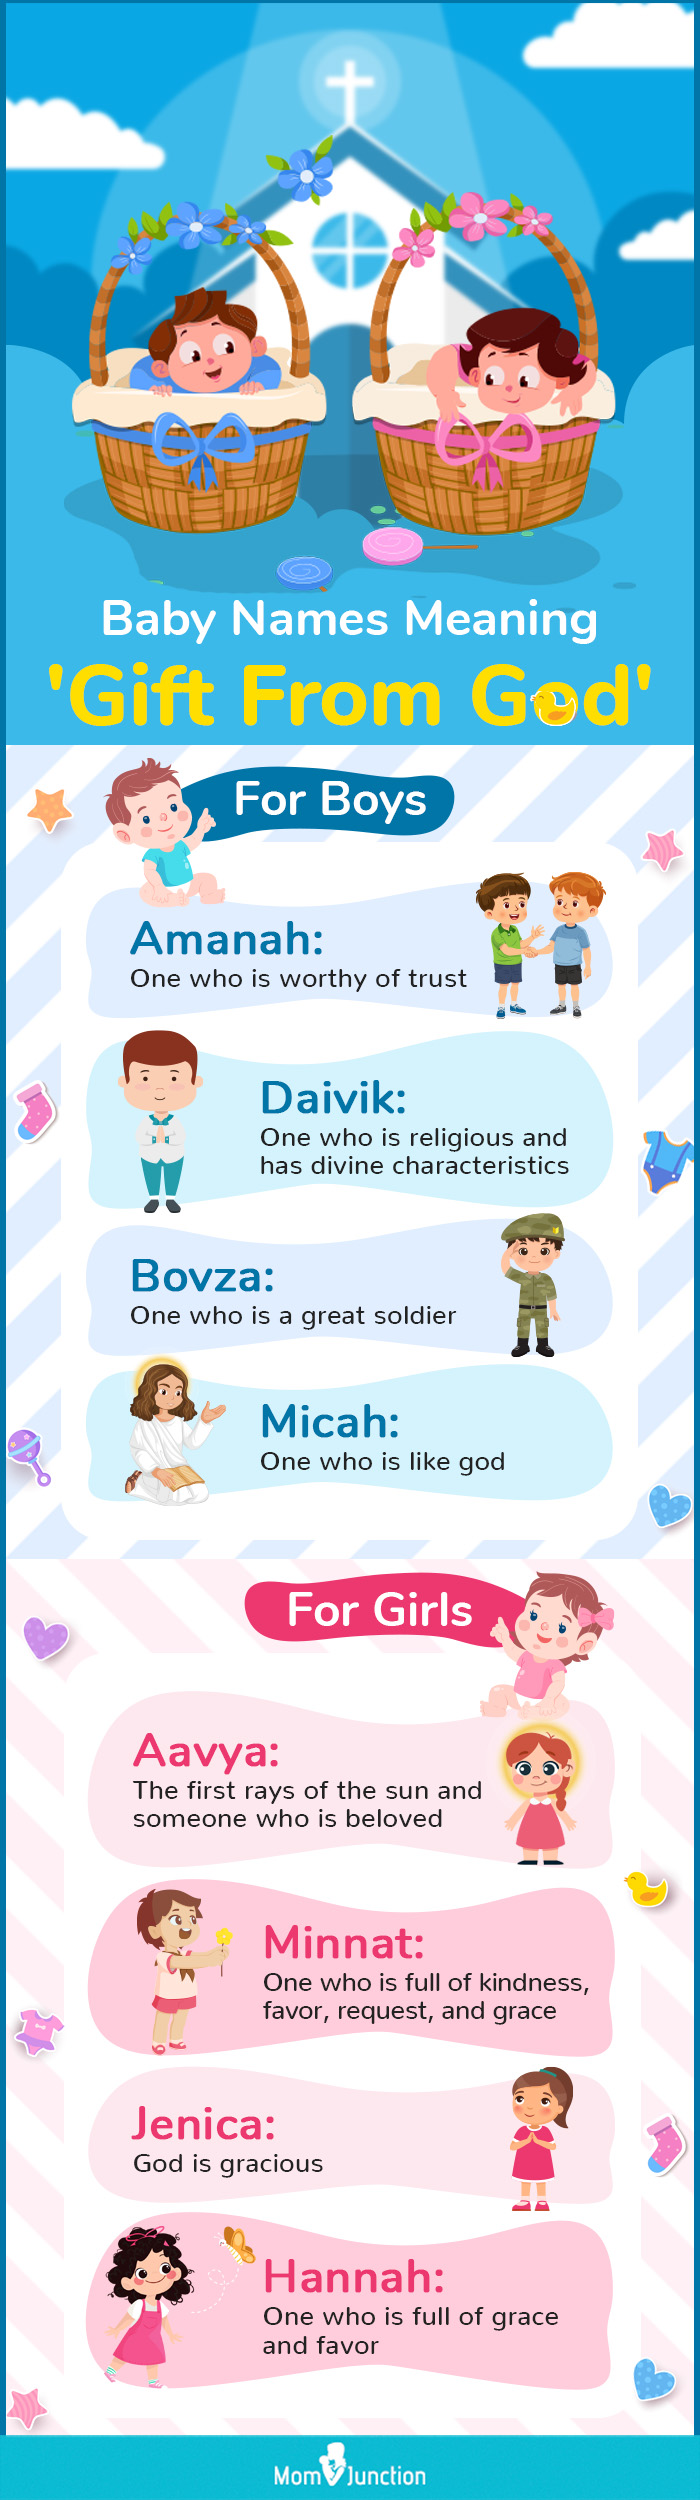 Baby Names Meaning Gift From God